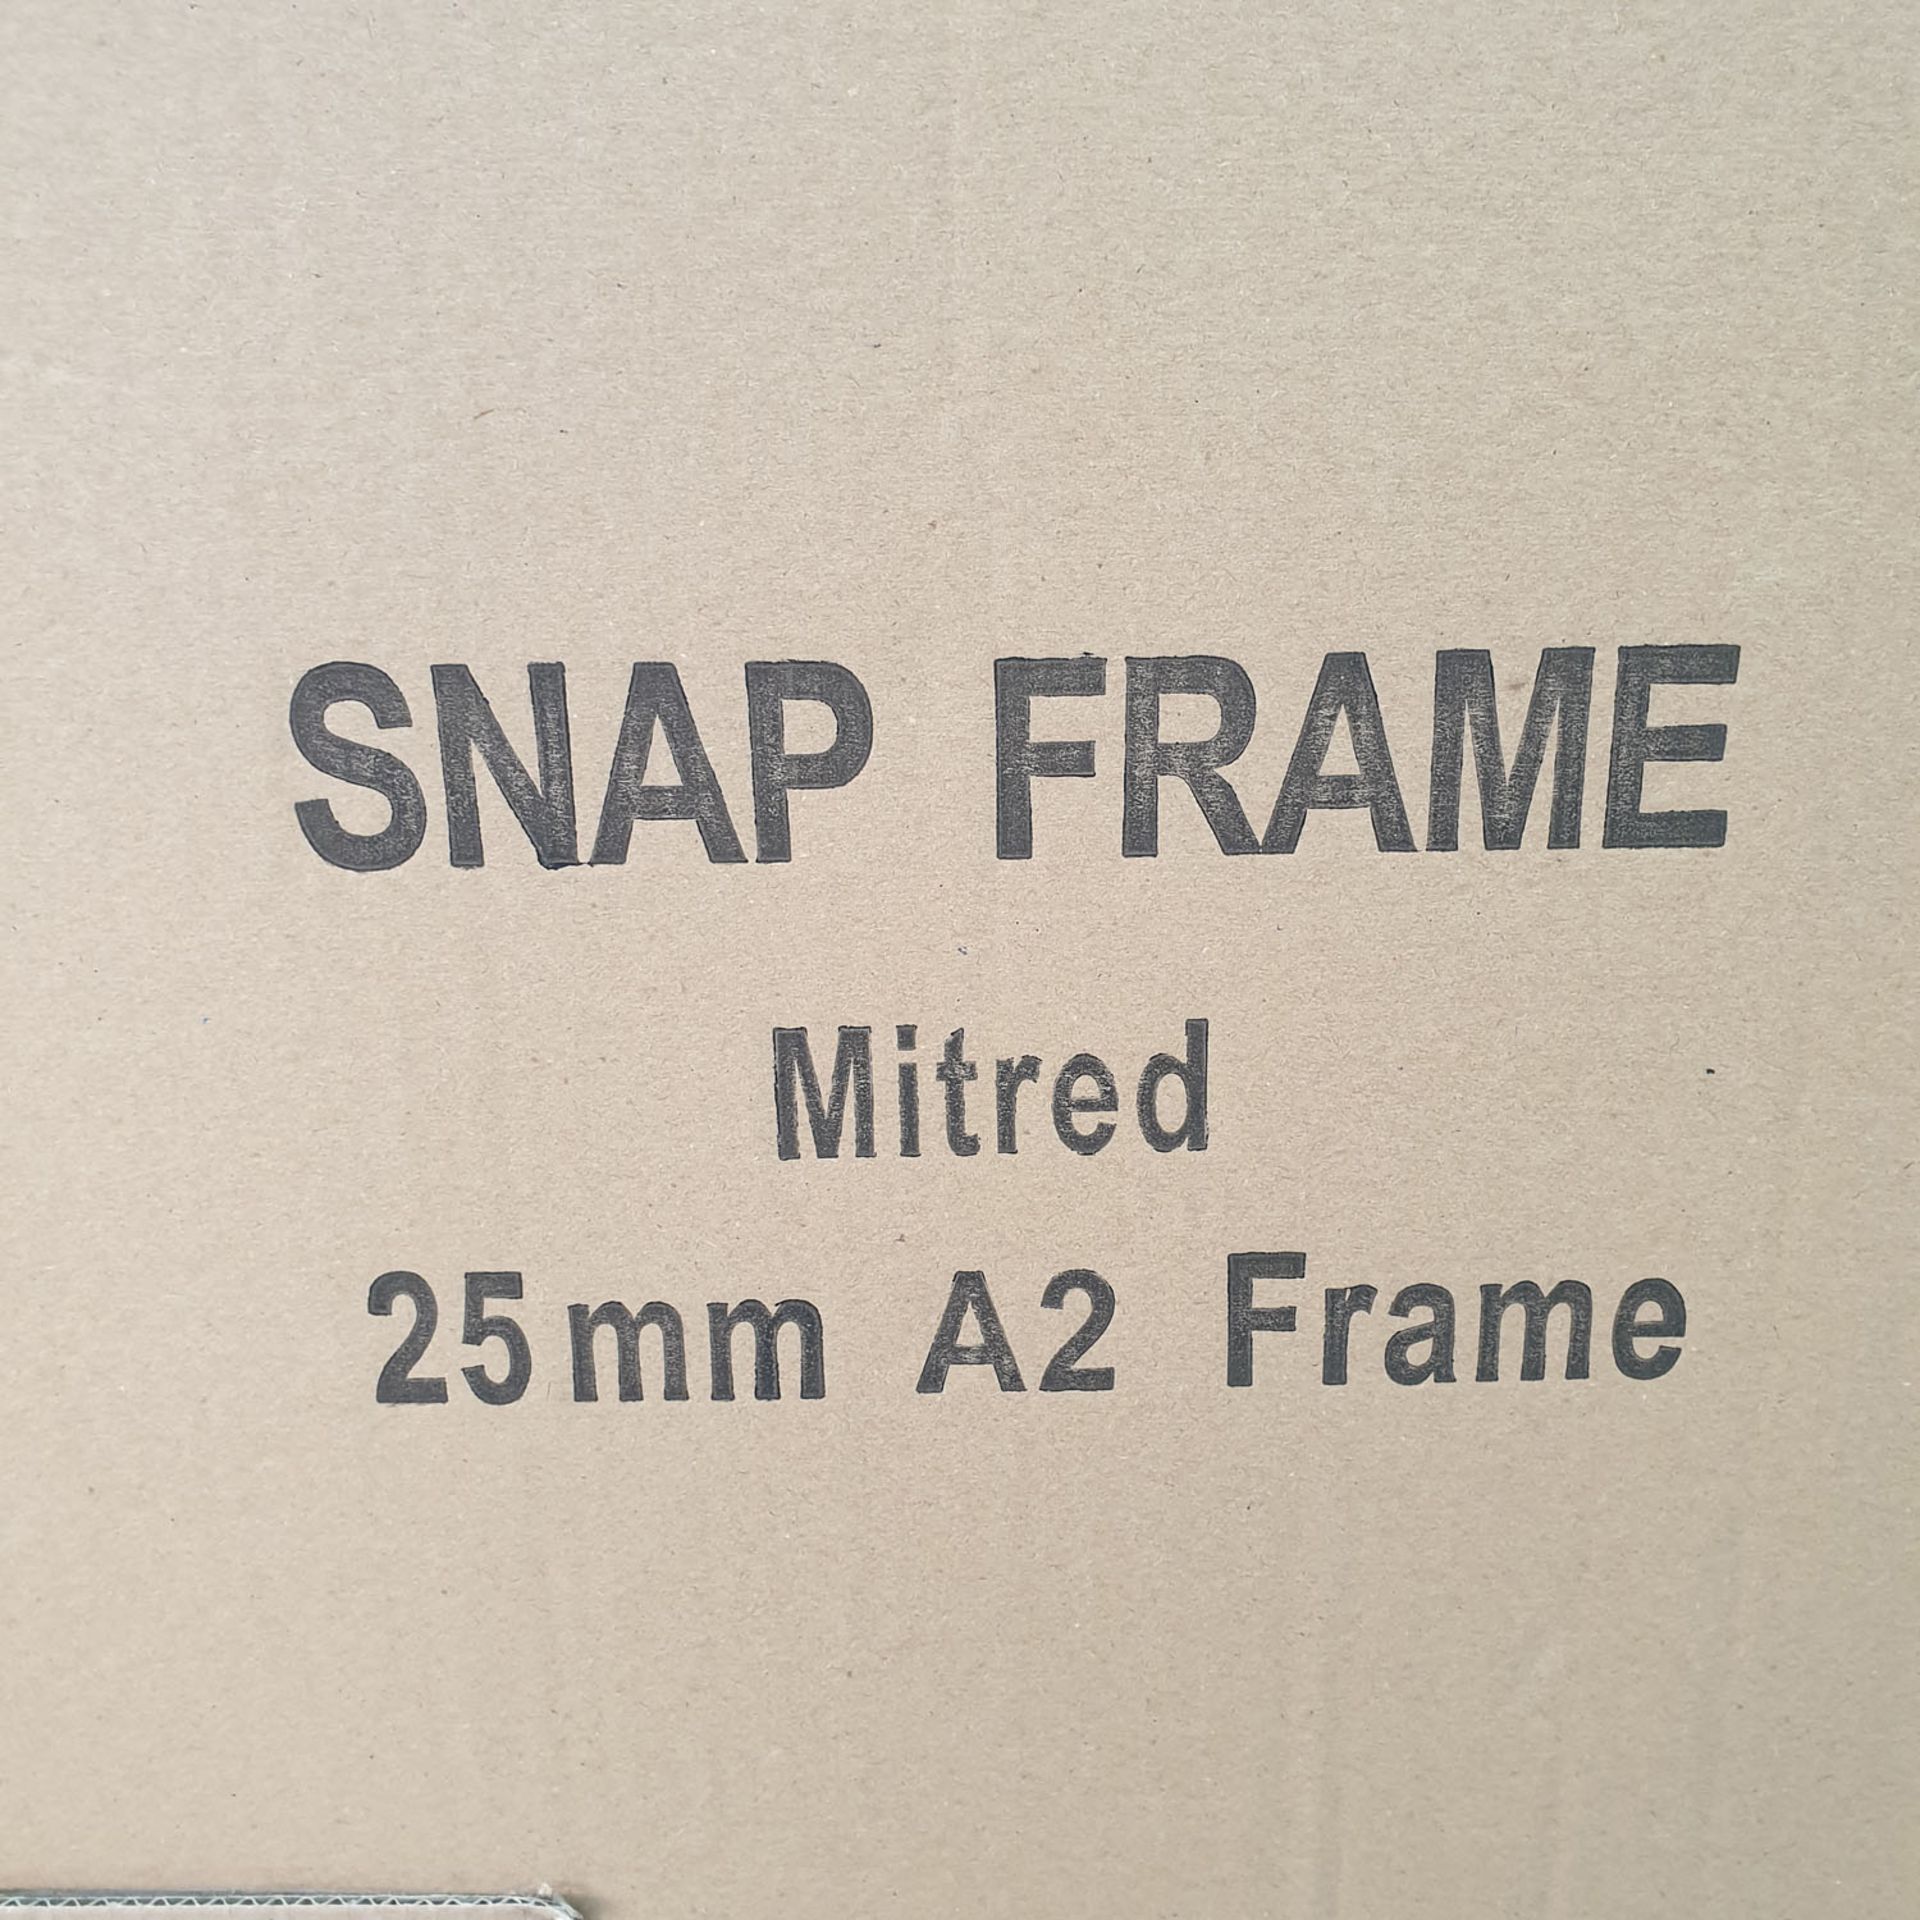 115 x Snap Frame Mitred 25mm A2 Frame - Image 4 of 9